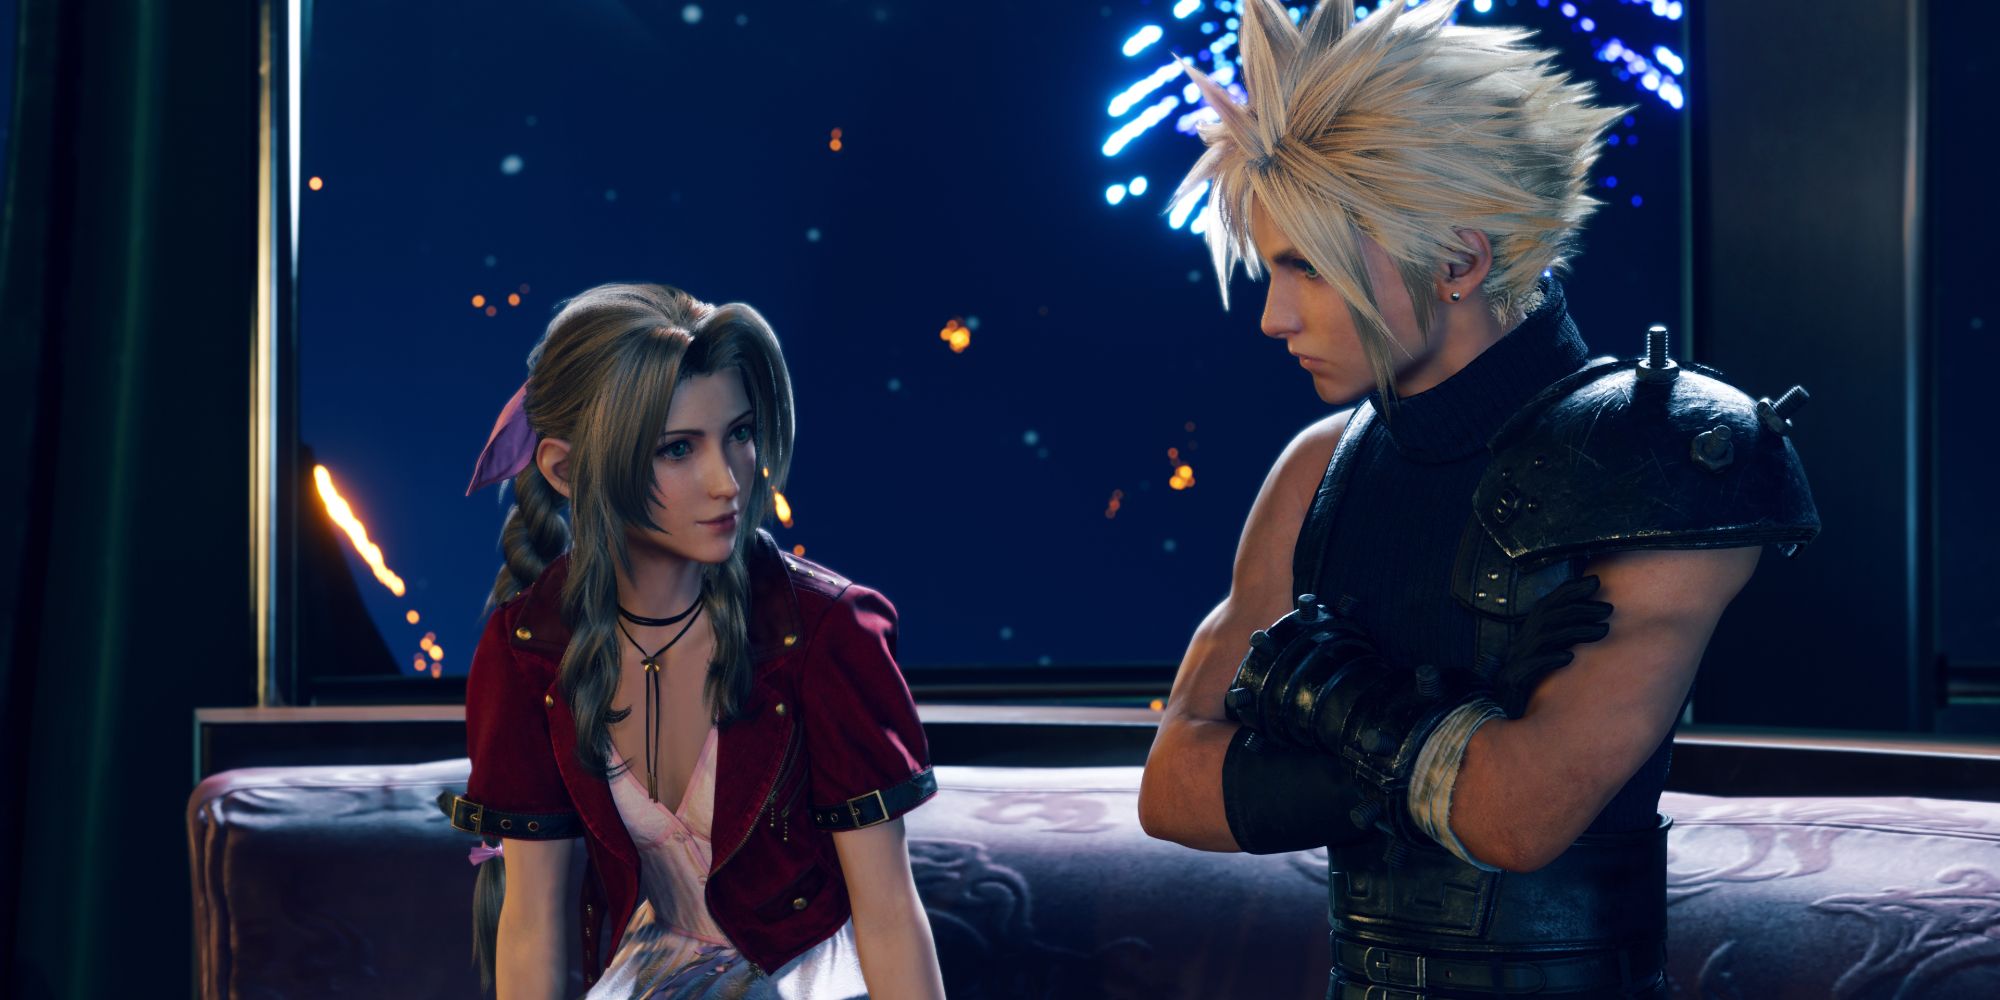 Cloud and Aerith in Final Fantasy 7 Rebirth, having a conversation by a window, and fireworks explode in the distance.